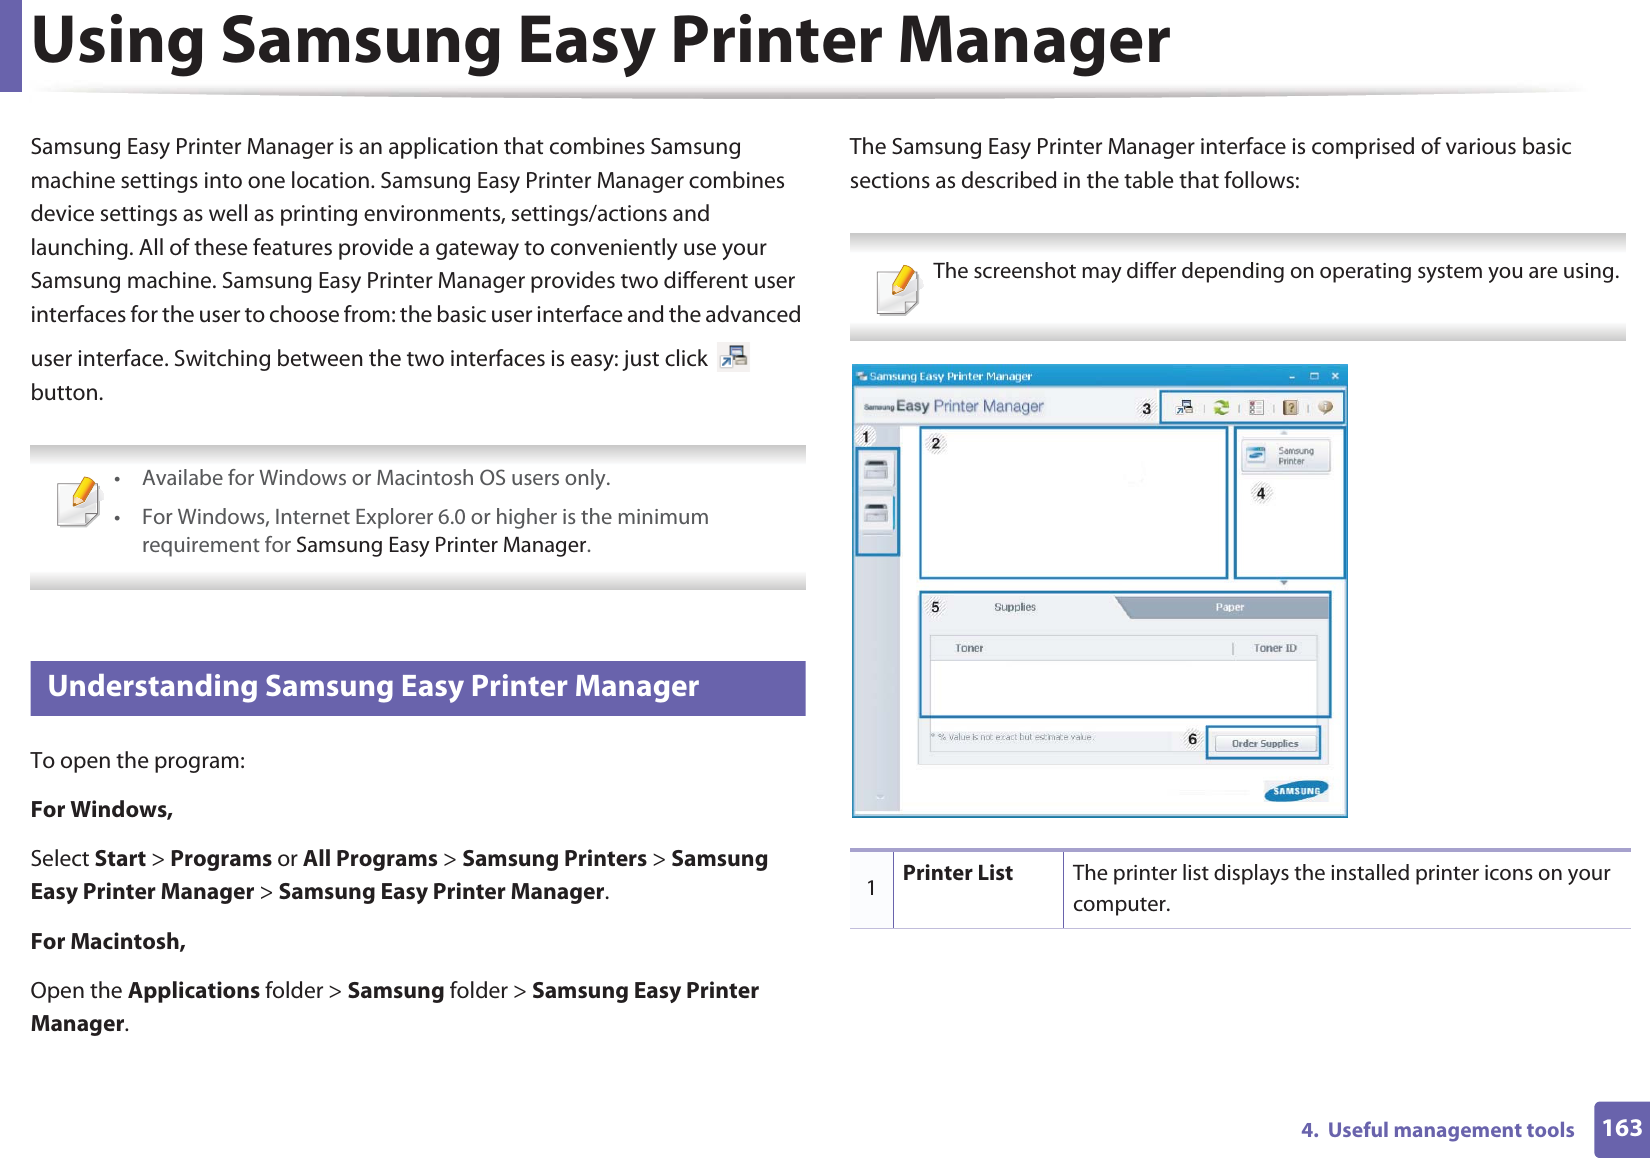 1634.  Useful management toolsUsing Samsung Easy Printer ManagerSamsung Easy Printer Manager is an application that combines Samsung machine settings into one location. Samsung Easy Printer Manager combines device settings as well as printing environments, settings/actions and launching. All of these features provide a gateway to conveniently use your Samsung machine. Samsung Easy Printer Manager provides two different user interfaces for the user to choose from: the basic user interface and the advanced user interface. Switching between the two interfaces is easy: just click   button. • Availabe for Windows or Macintosh OS users only.• For Windows, Internet Explorer 6.0 or higher is the minimum requirement for Samsung Easy Printer Manager. 5 Understanding Samsung Easy Printer ManagerTo open the program: For Windows,Select Start &gt; Programs or All Programs &gt; Samsung Printers &gt; Samsung Easy Printer Manager &gt; Samsung Easy Printer Manager.For Macintosh,Open the Applications folder &gt; Samsung folder &gt; Samsung Easy Printer Manager.The Samsung Easy Printer Manager interface is comprised of various basic sections as described in the table that follows: The screenshot may differ depending on operating system you are using. 1Printer List The printer list displays the installed printer icons on your computer.